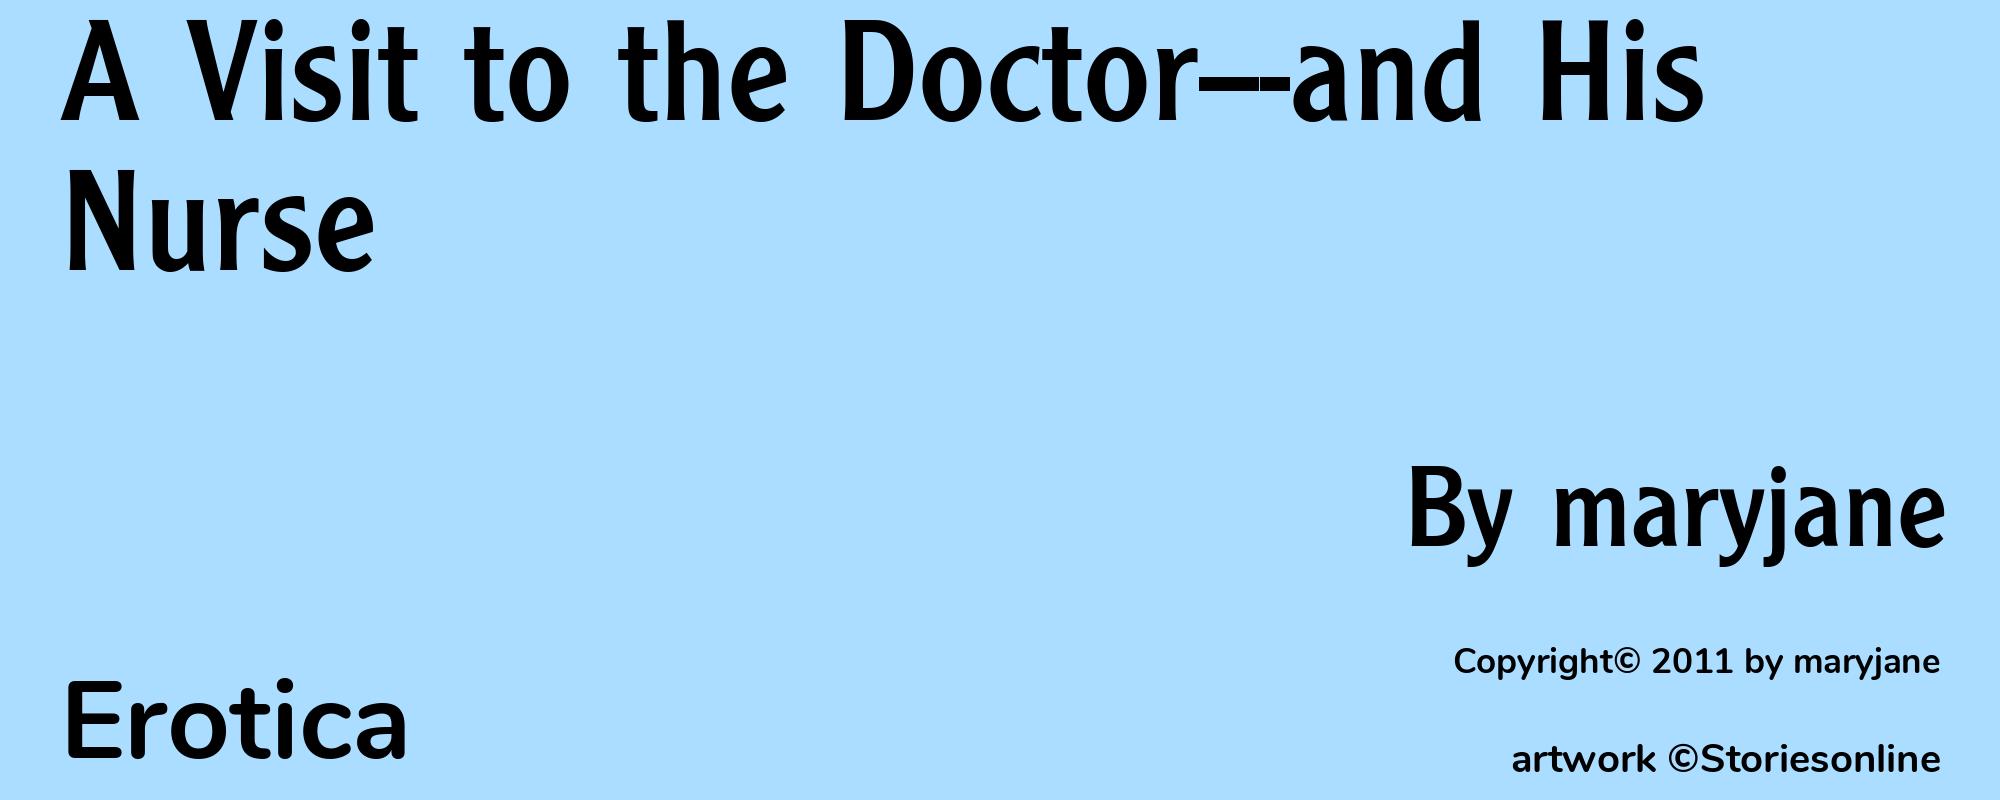 A Visit to the Doctor---and His Nurse - Cover